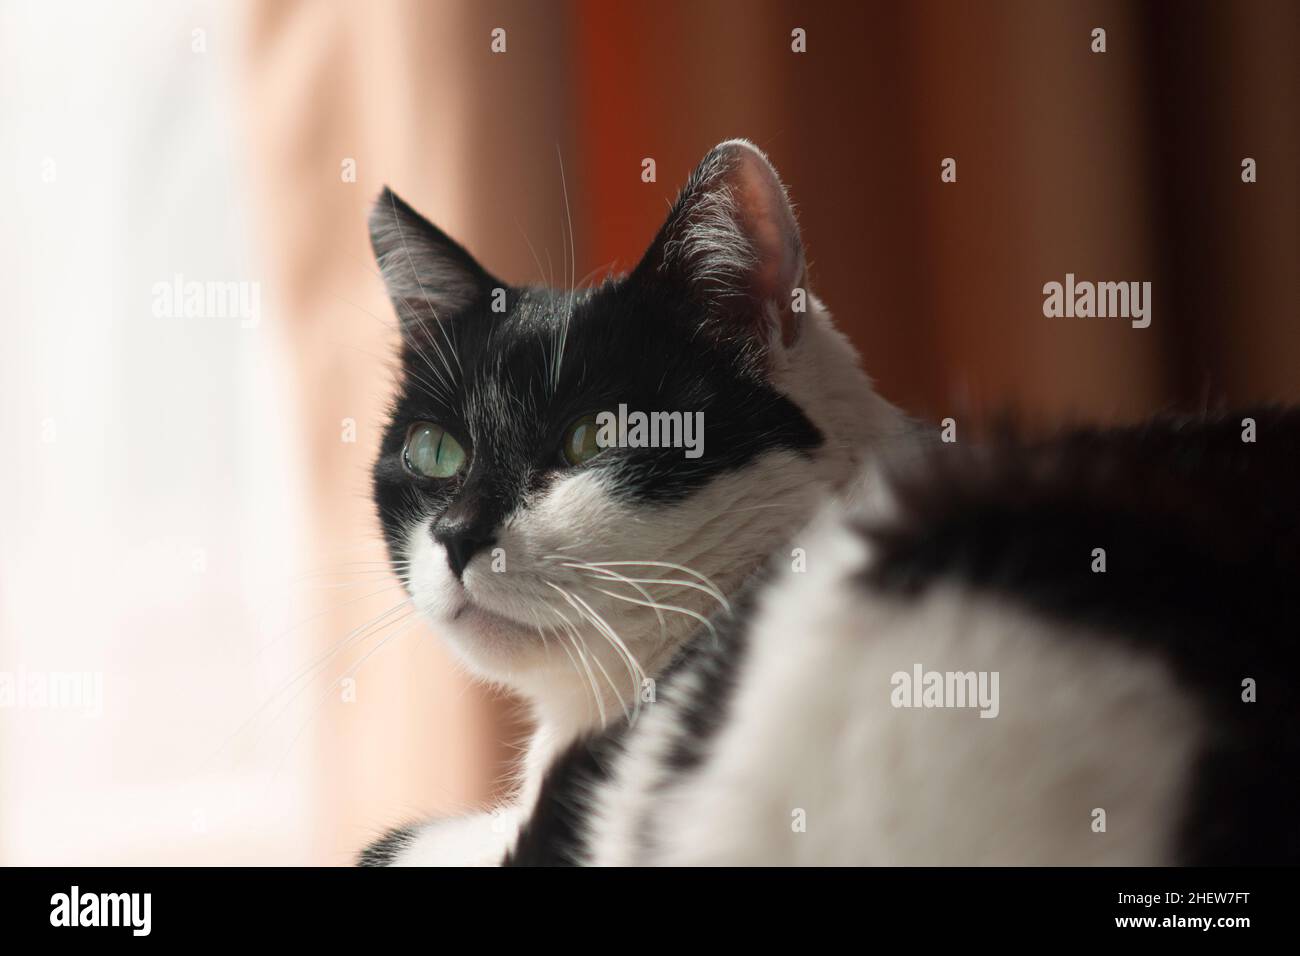 Portrait of white cat with black spots resting in a room with curtains in the background Stock Photo